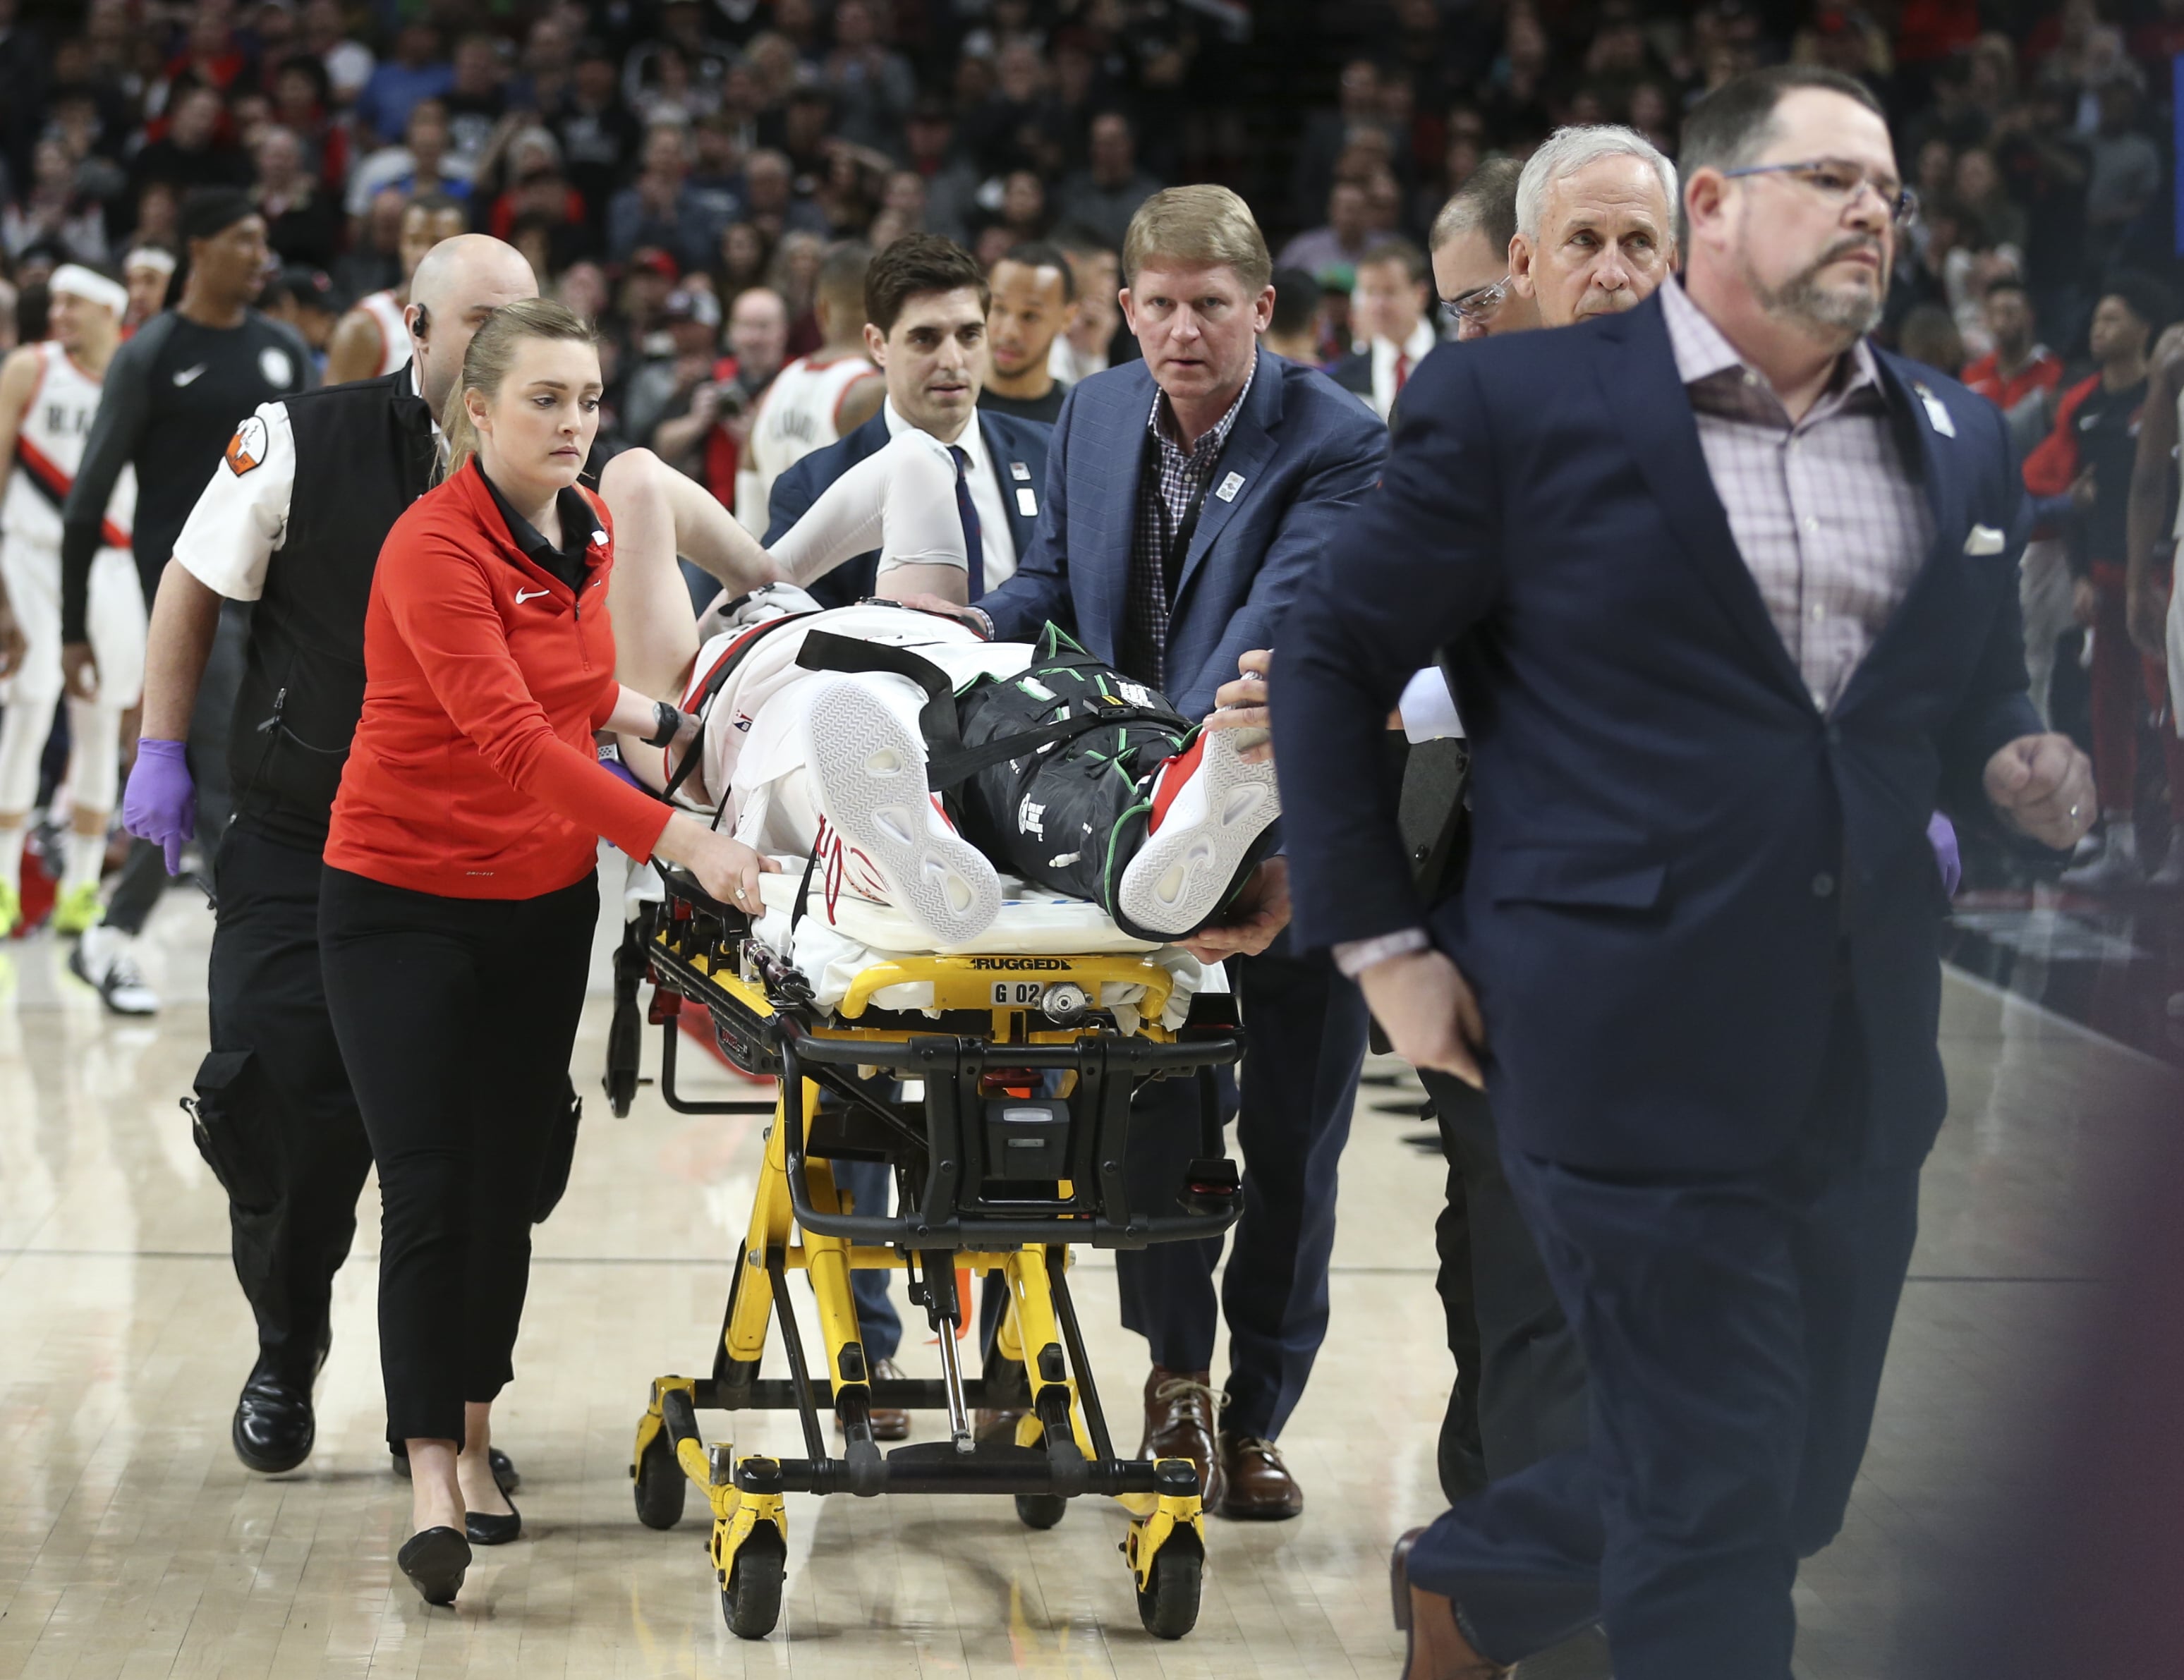 Portland Trail Blazers center Jusuf Nurkic, center, was injured and left the court on a stretcher as the Blazers beat the Brooklyn Nets in double overtime, 148-144, during an NBA basketball game in Portland, Ore., Monday, March 25, 2019. (AP Photo/Randy L.